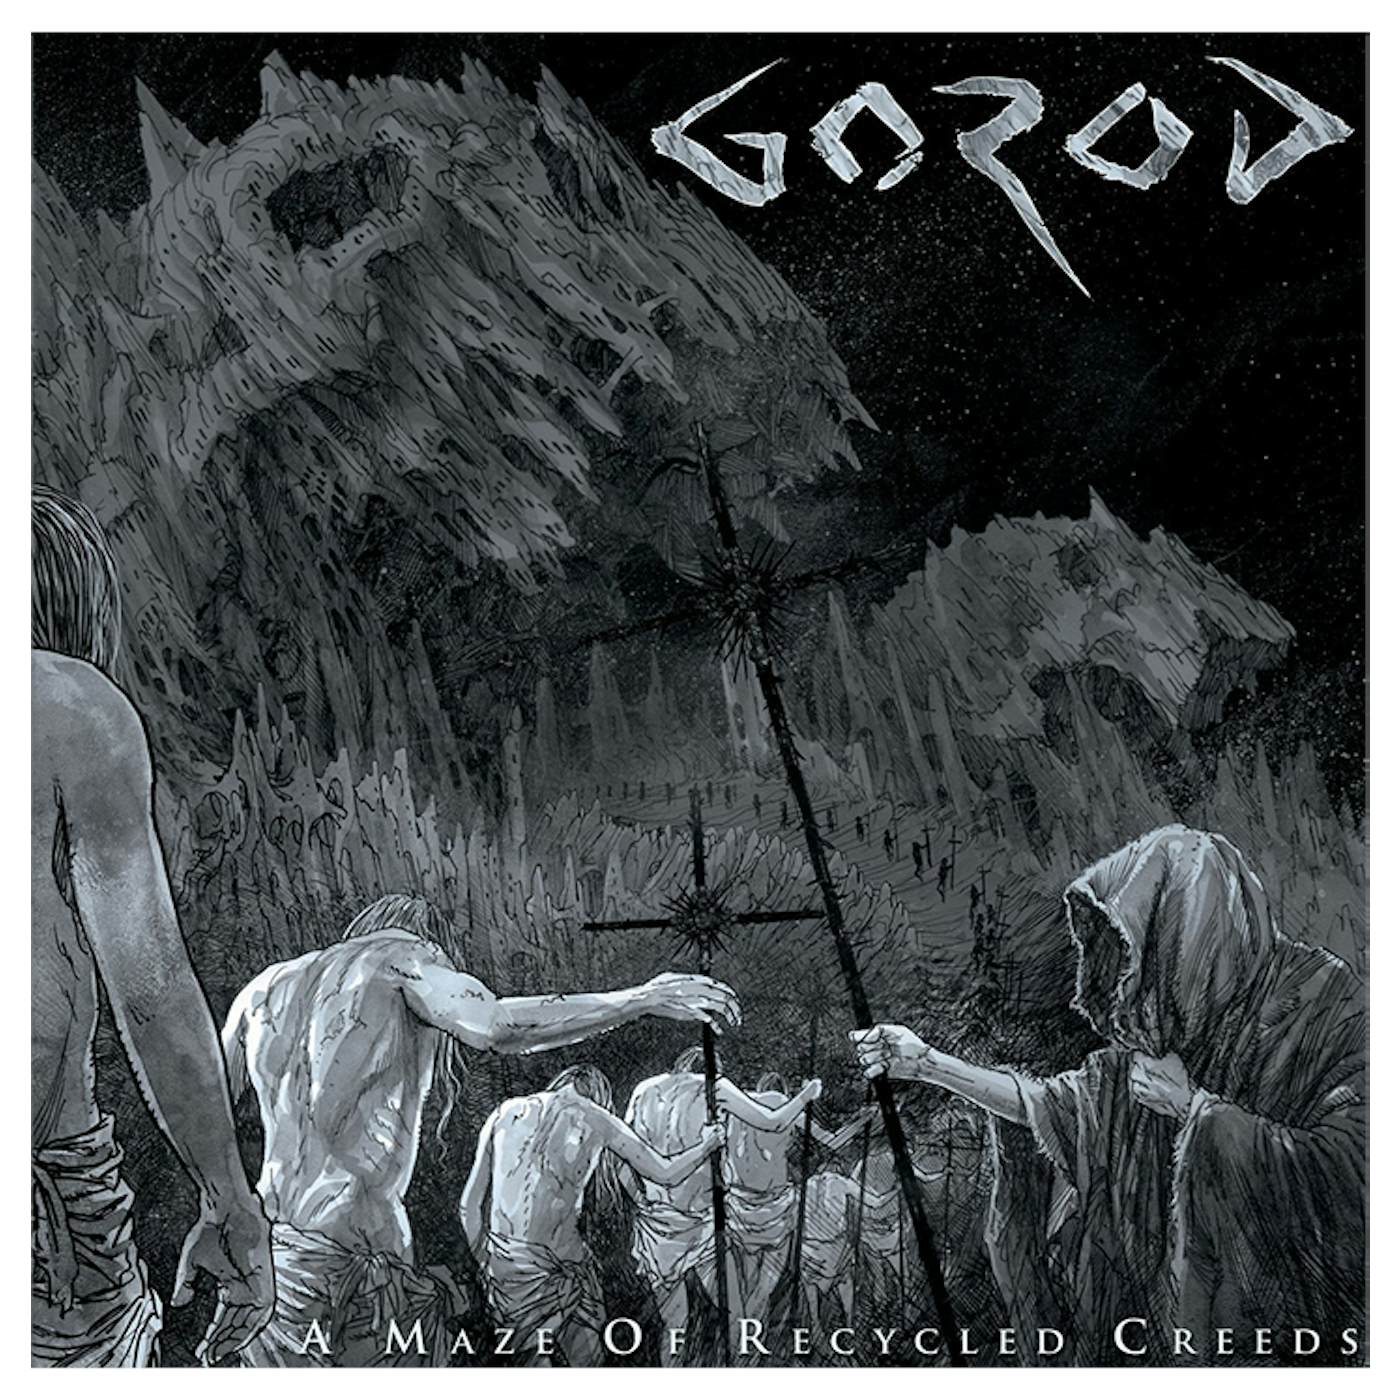 GOROD - 'A Maze Of Recycled Creeds' CD